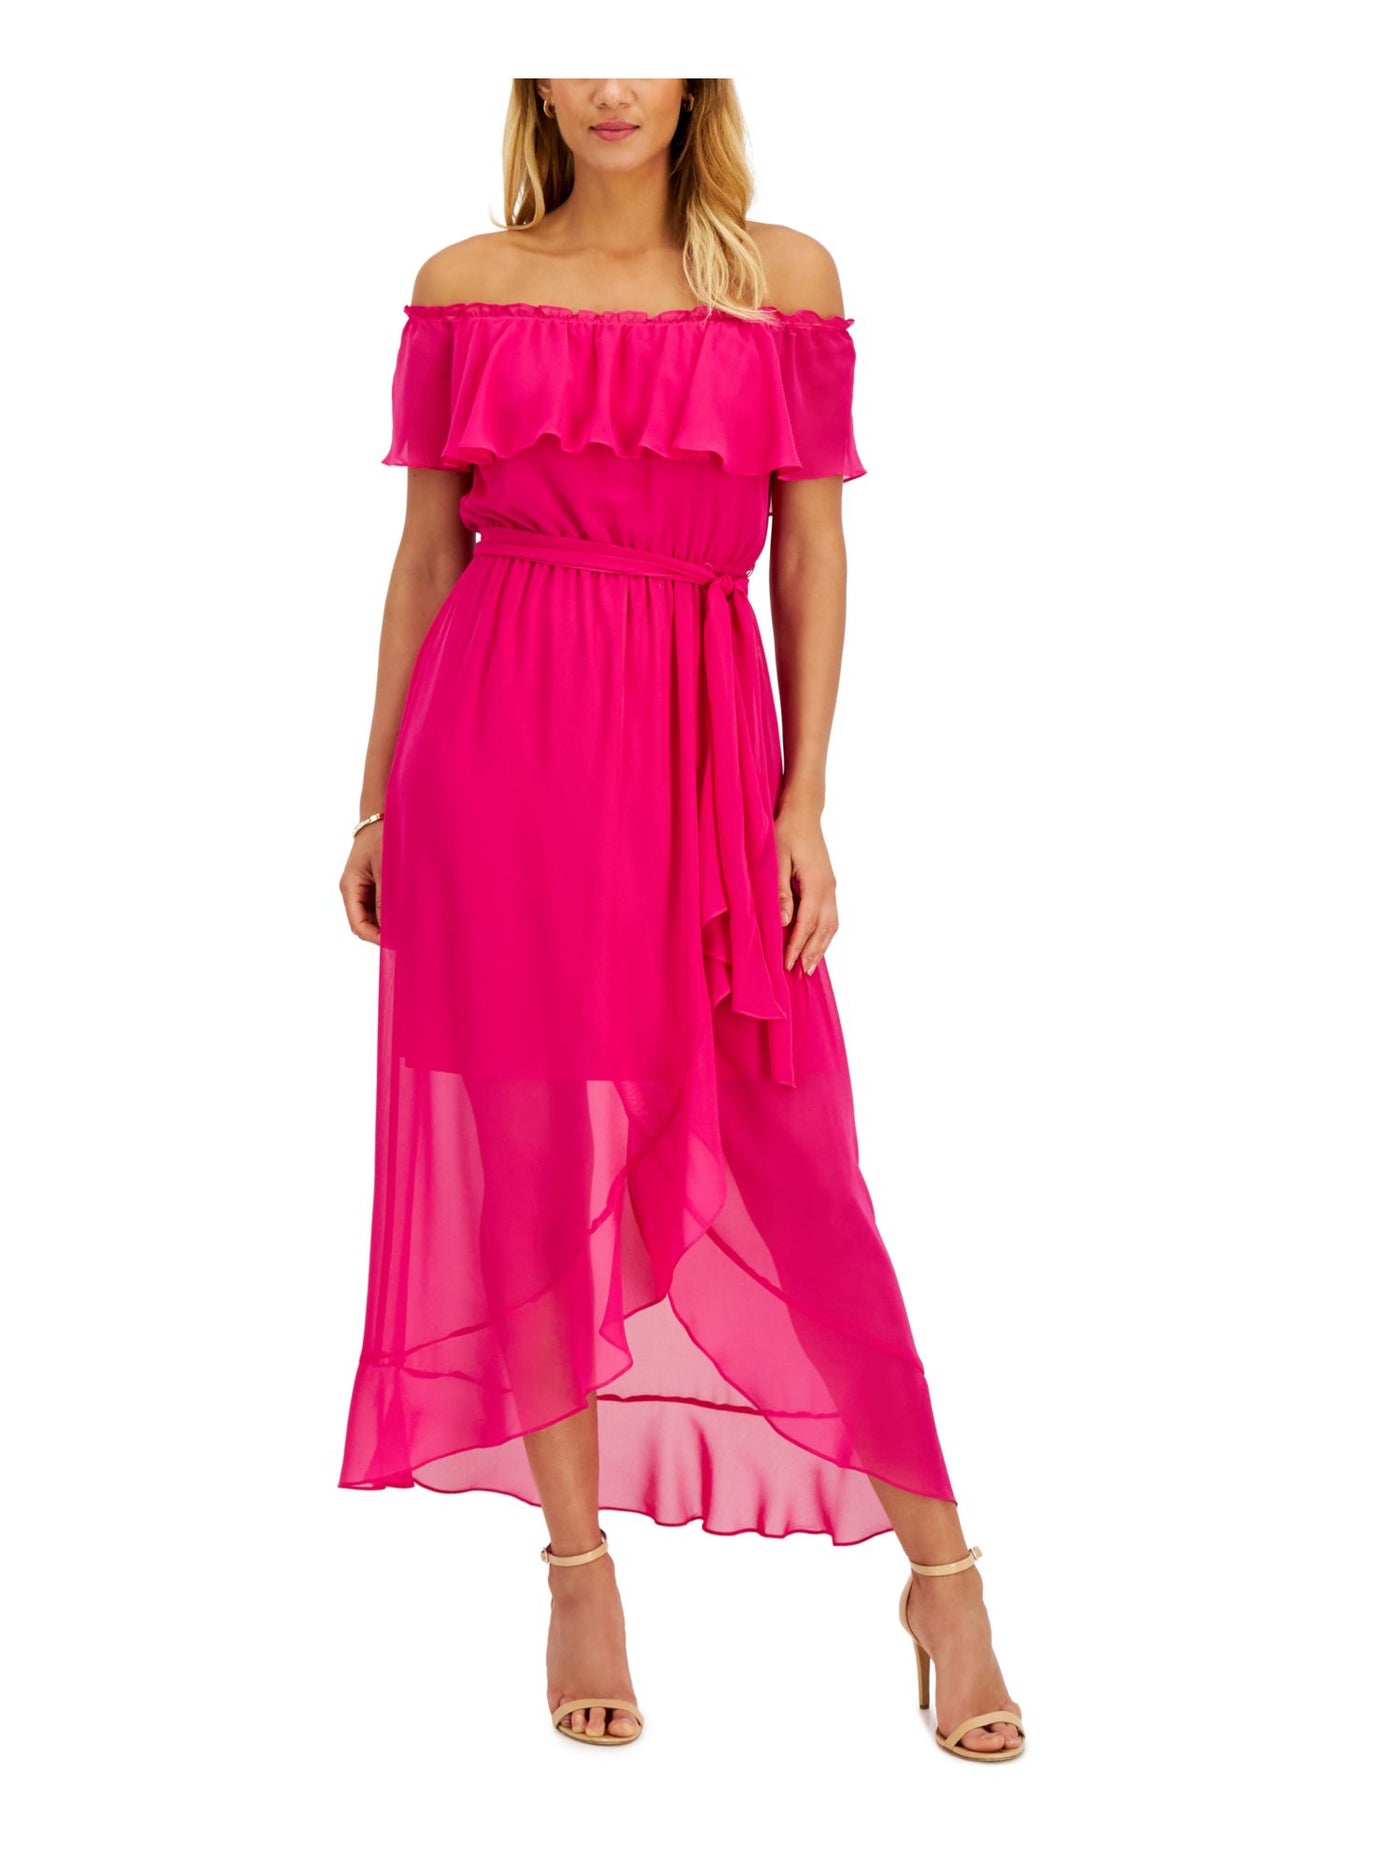 SLNY Womens Pink Ruffled Sheer Lined Tie Waist Short Sleeve Off Shoulder Maxi Party Fit + Flare Dress 8